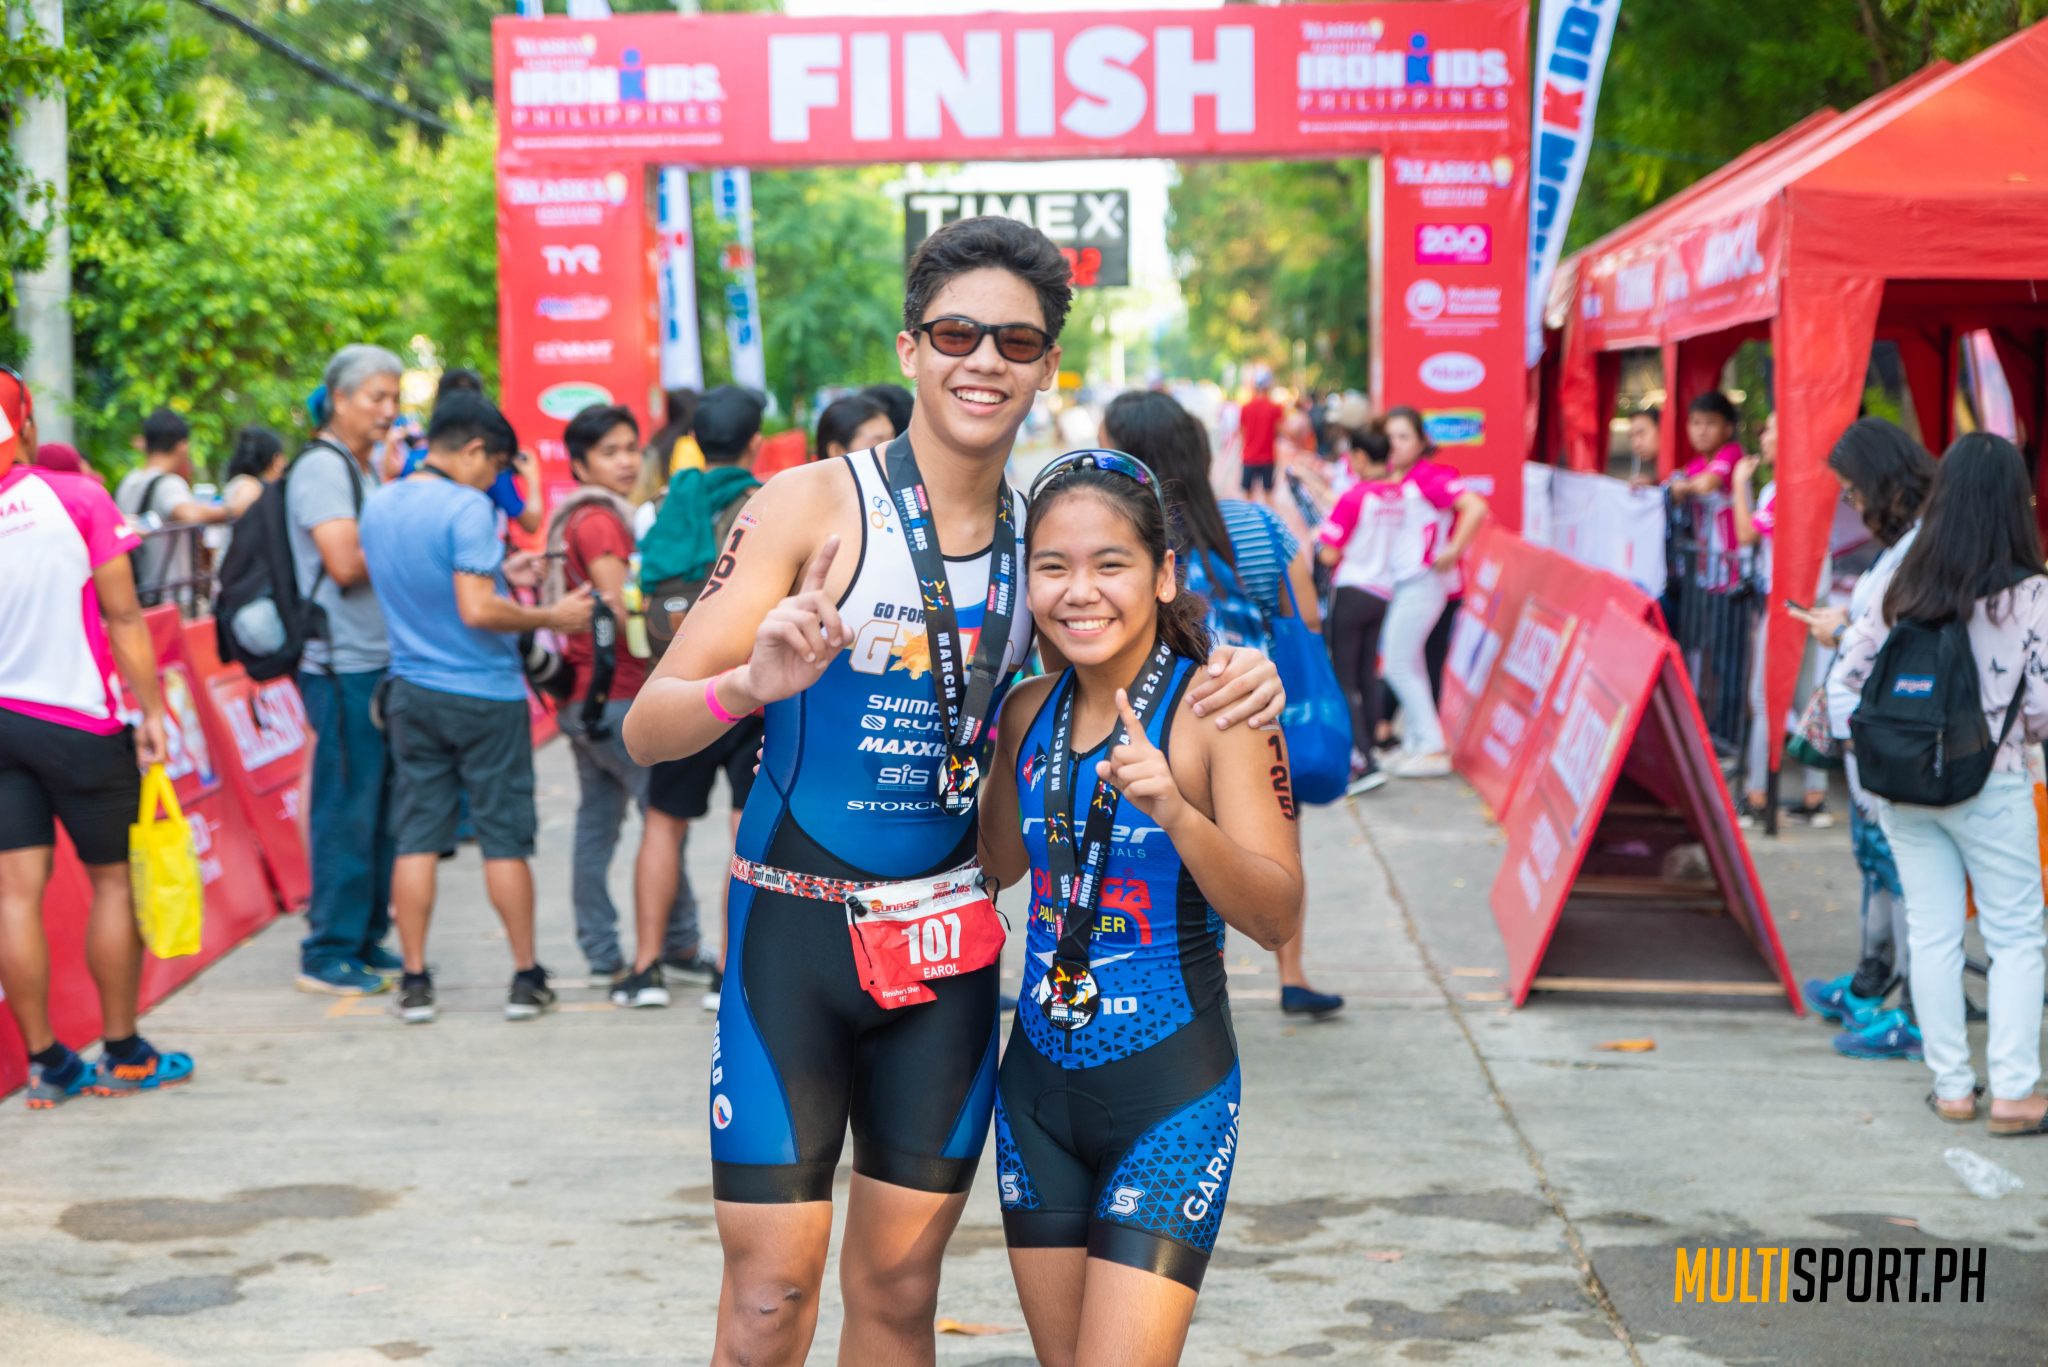 The top two IronKids finishers